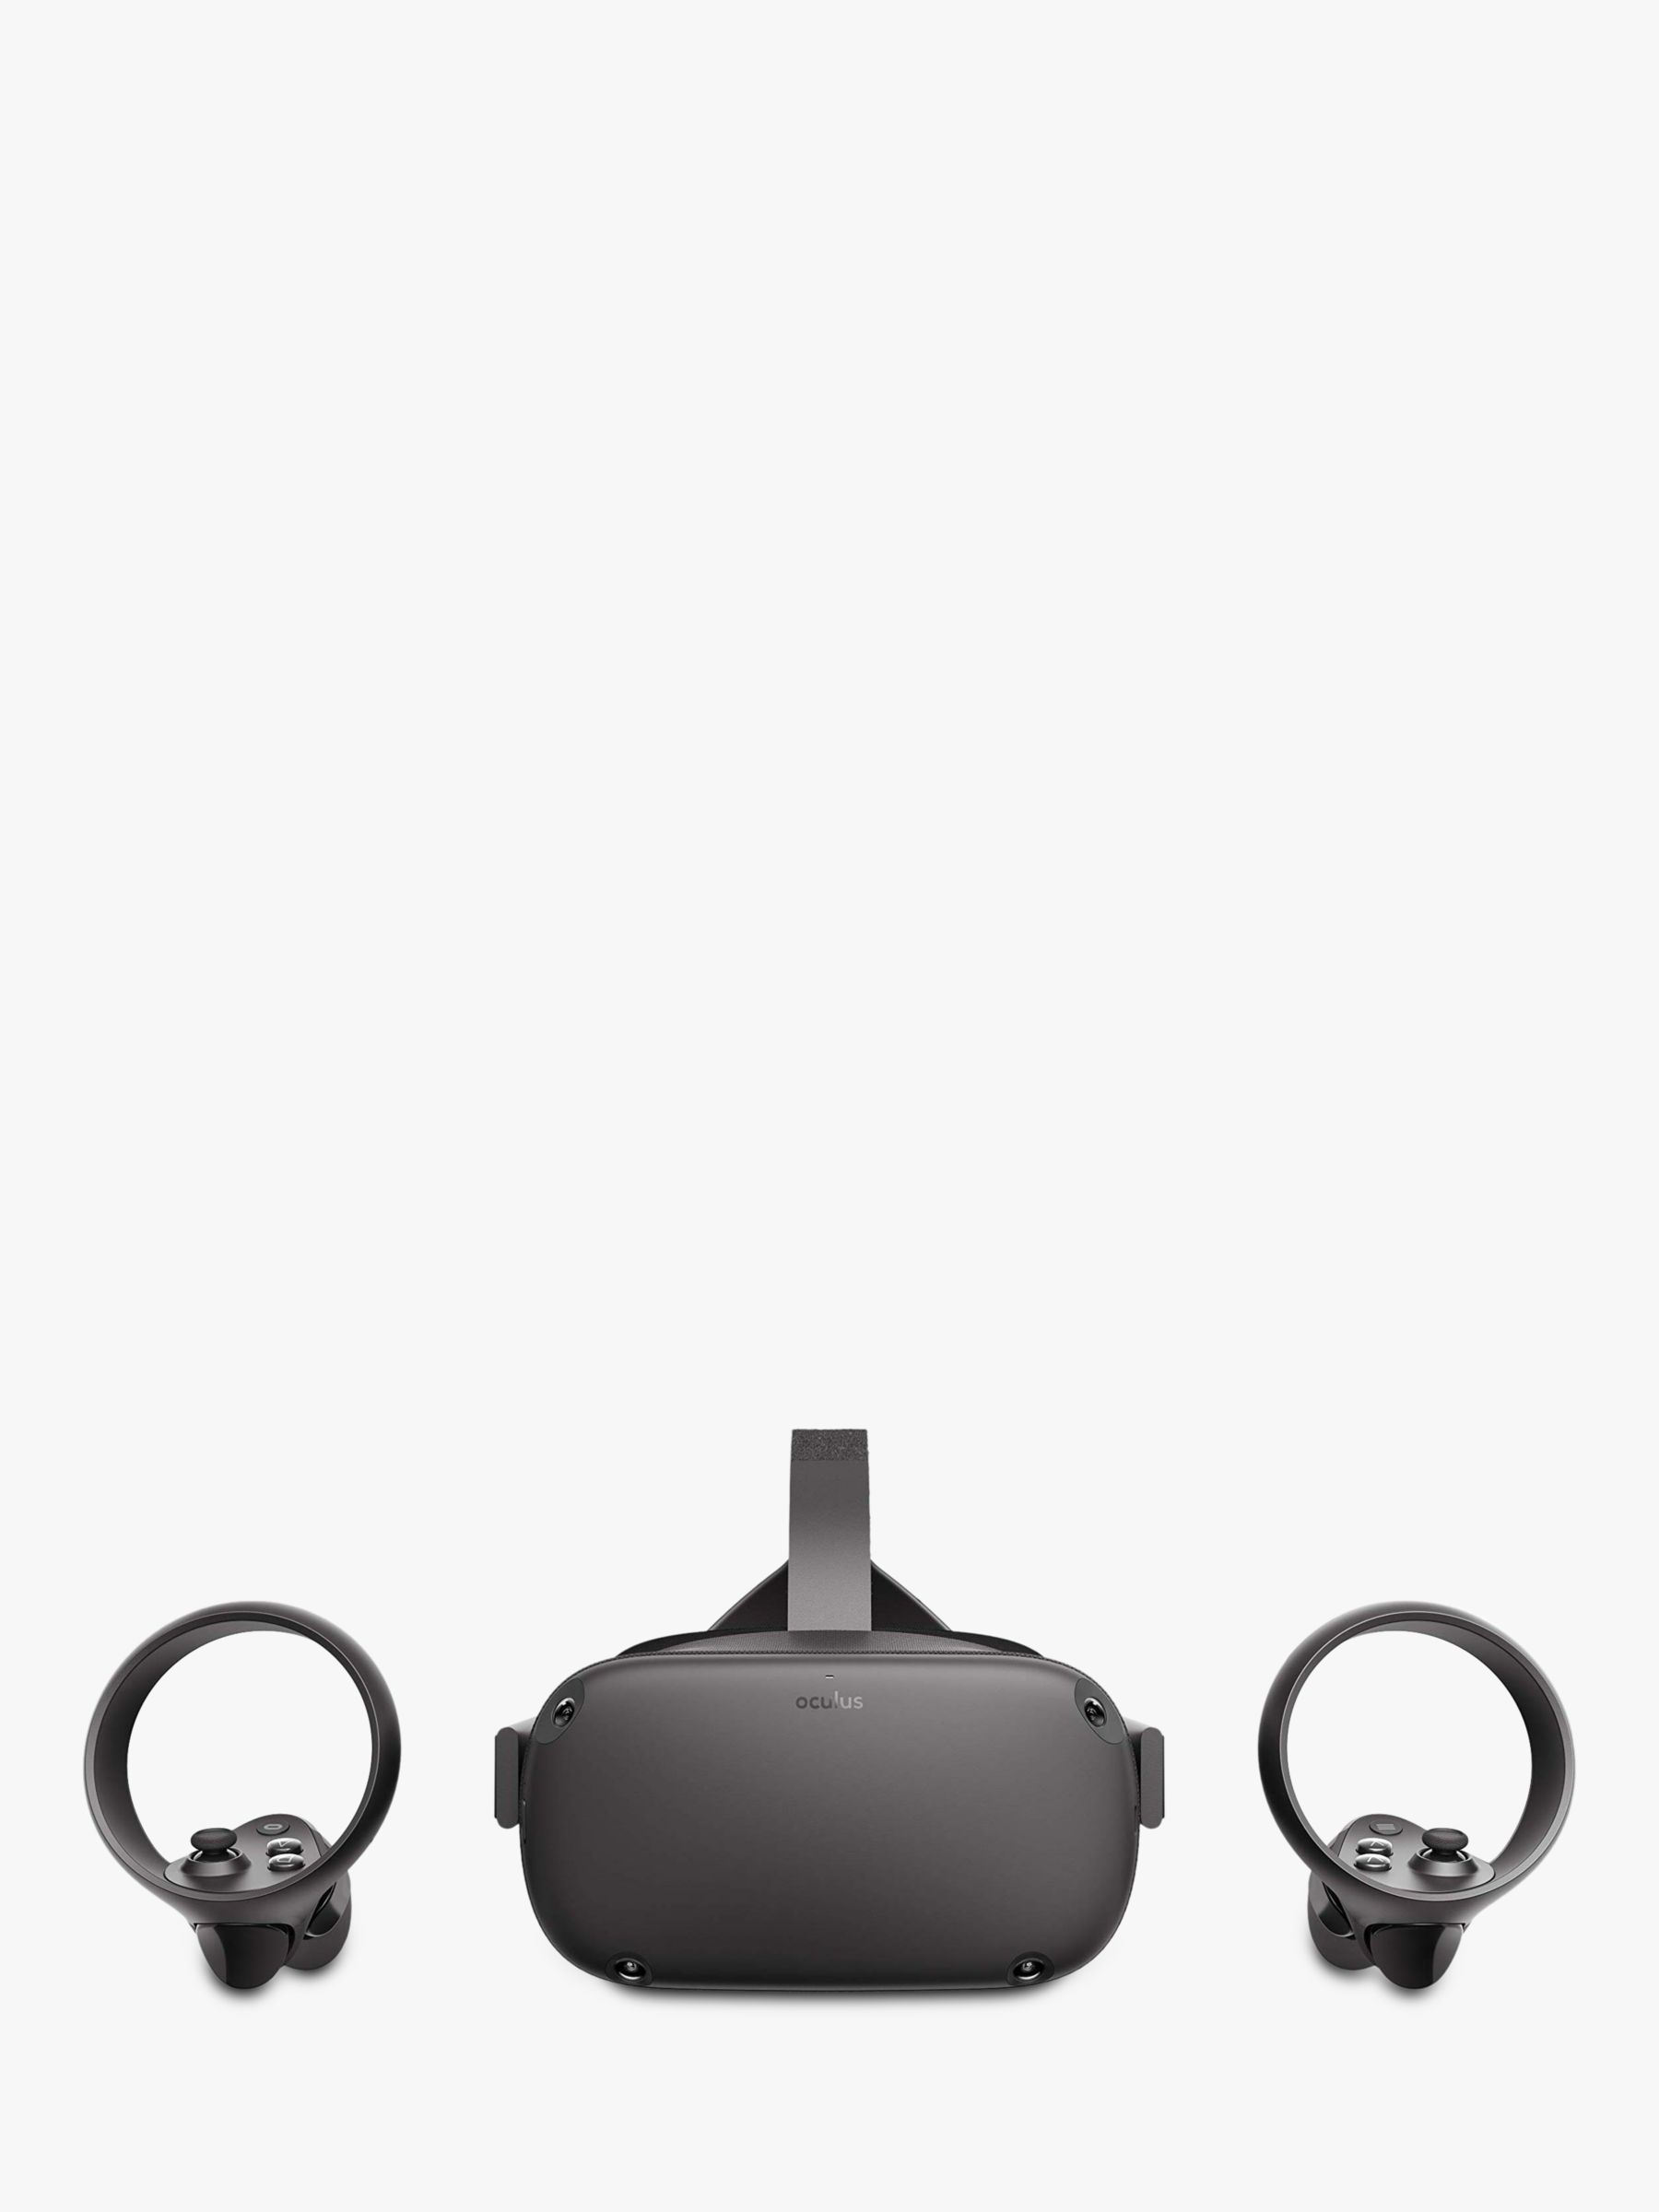 oculus all in one 128gb